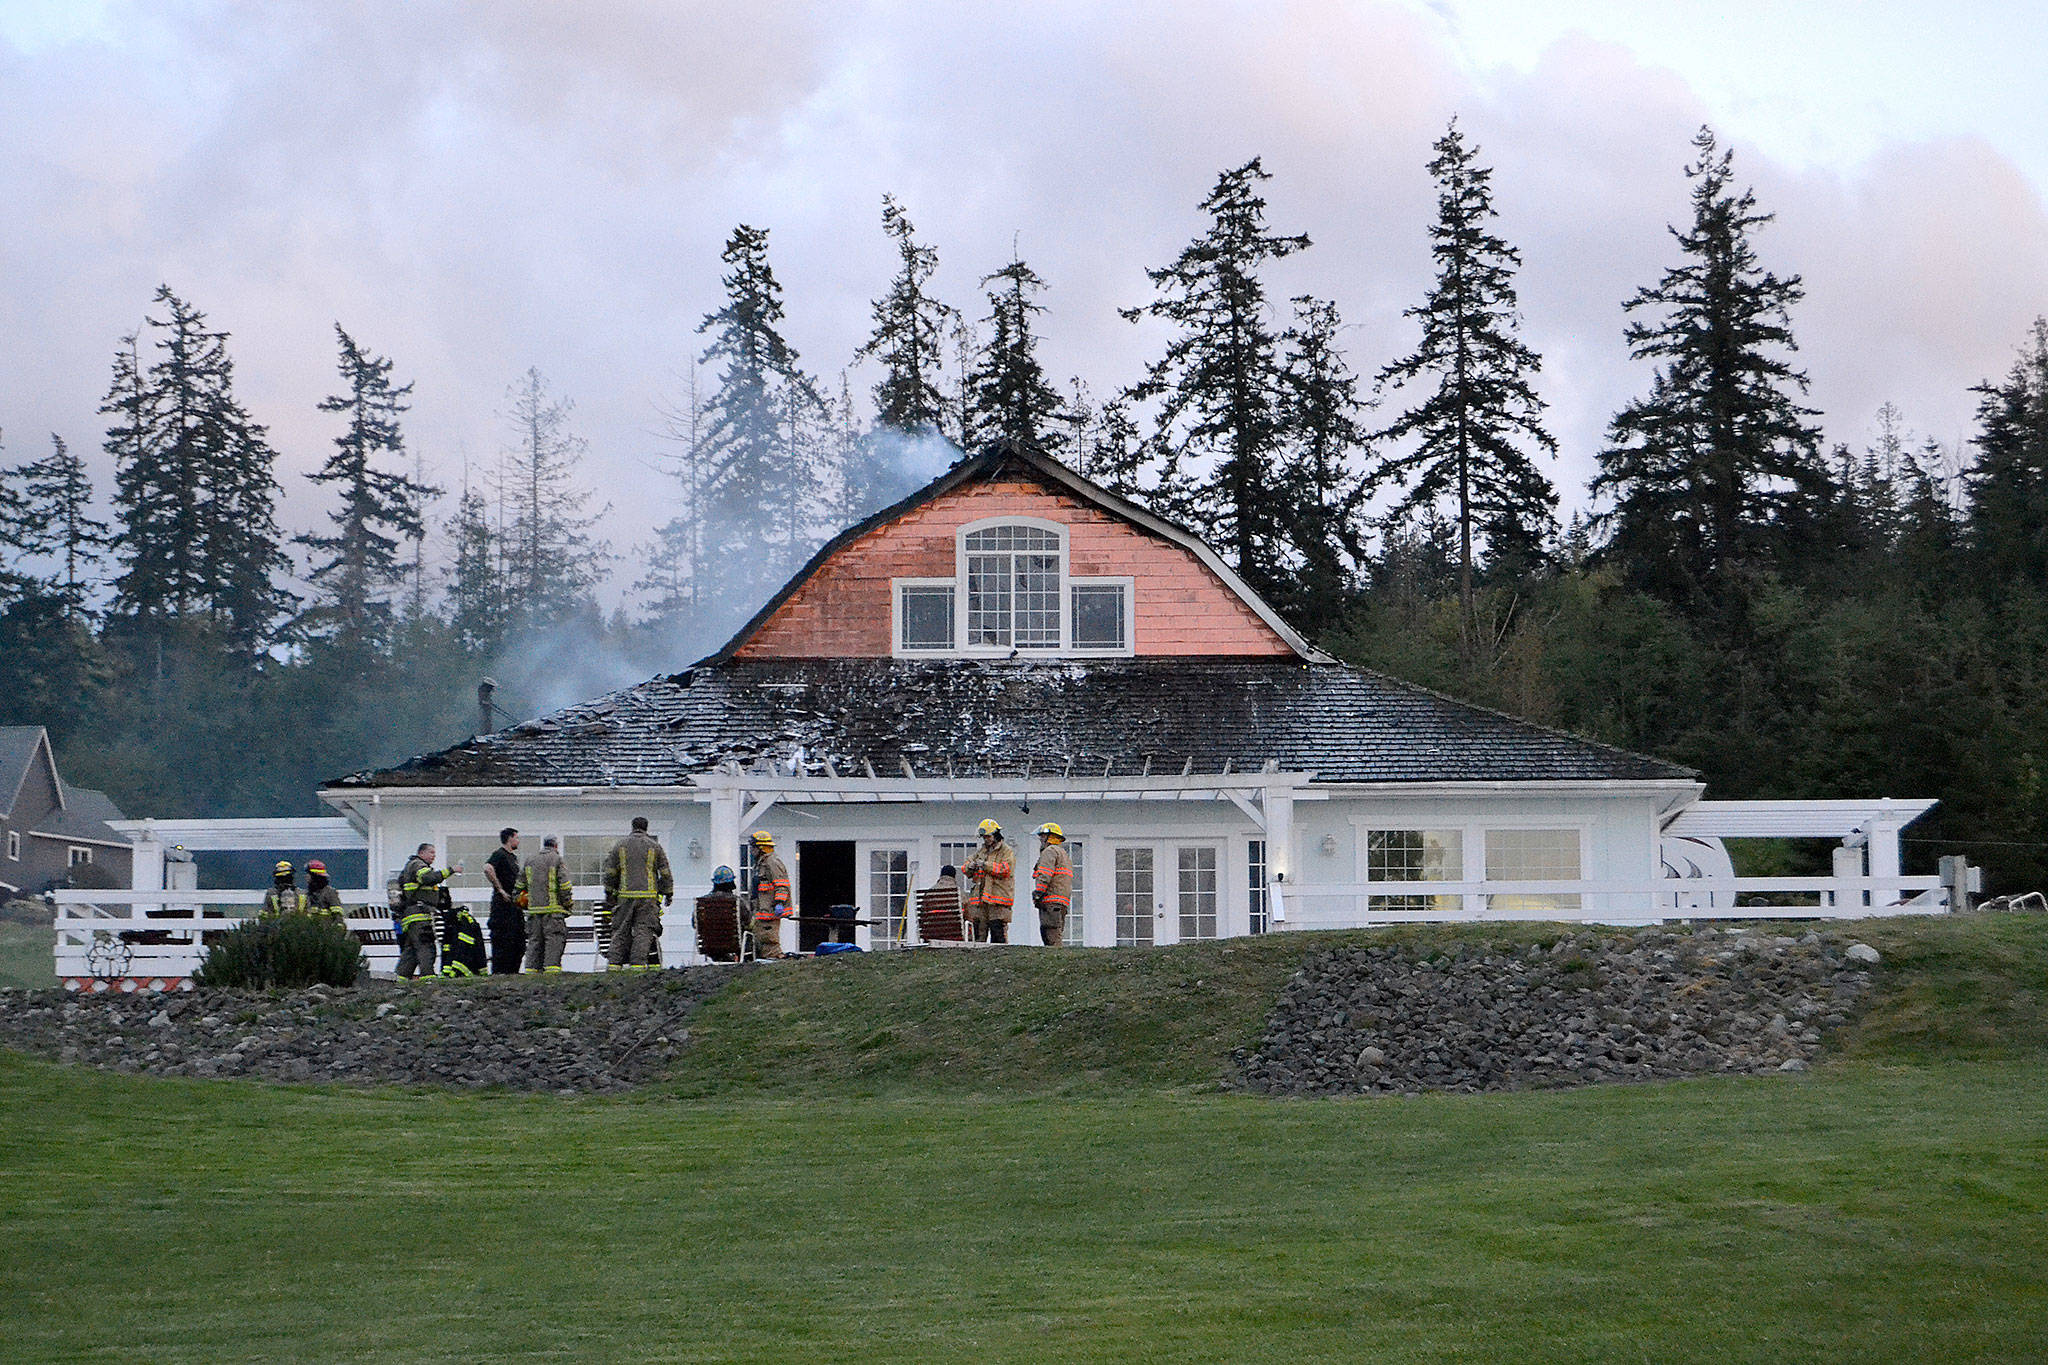 A cause for the fire in this Gardiner home remains under investigation, says fire officials with Clallam County Fire District 3. When fire crews responded on April 26, the attic was fully involved in flames. Sequim Gazette photo by Matthew Nash